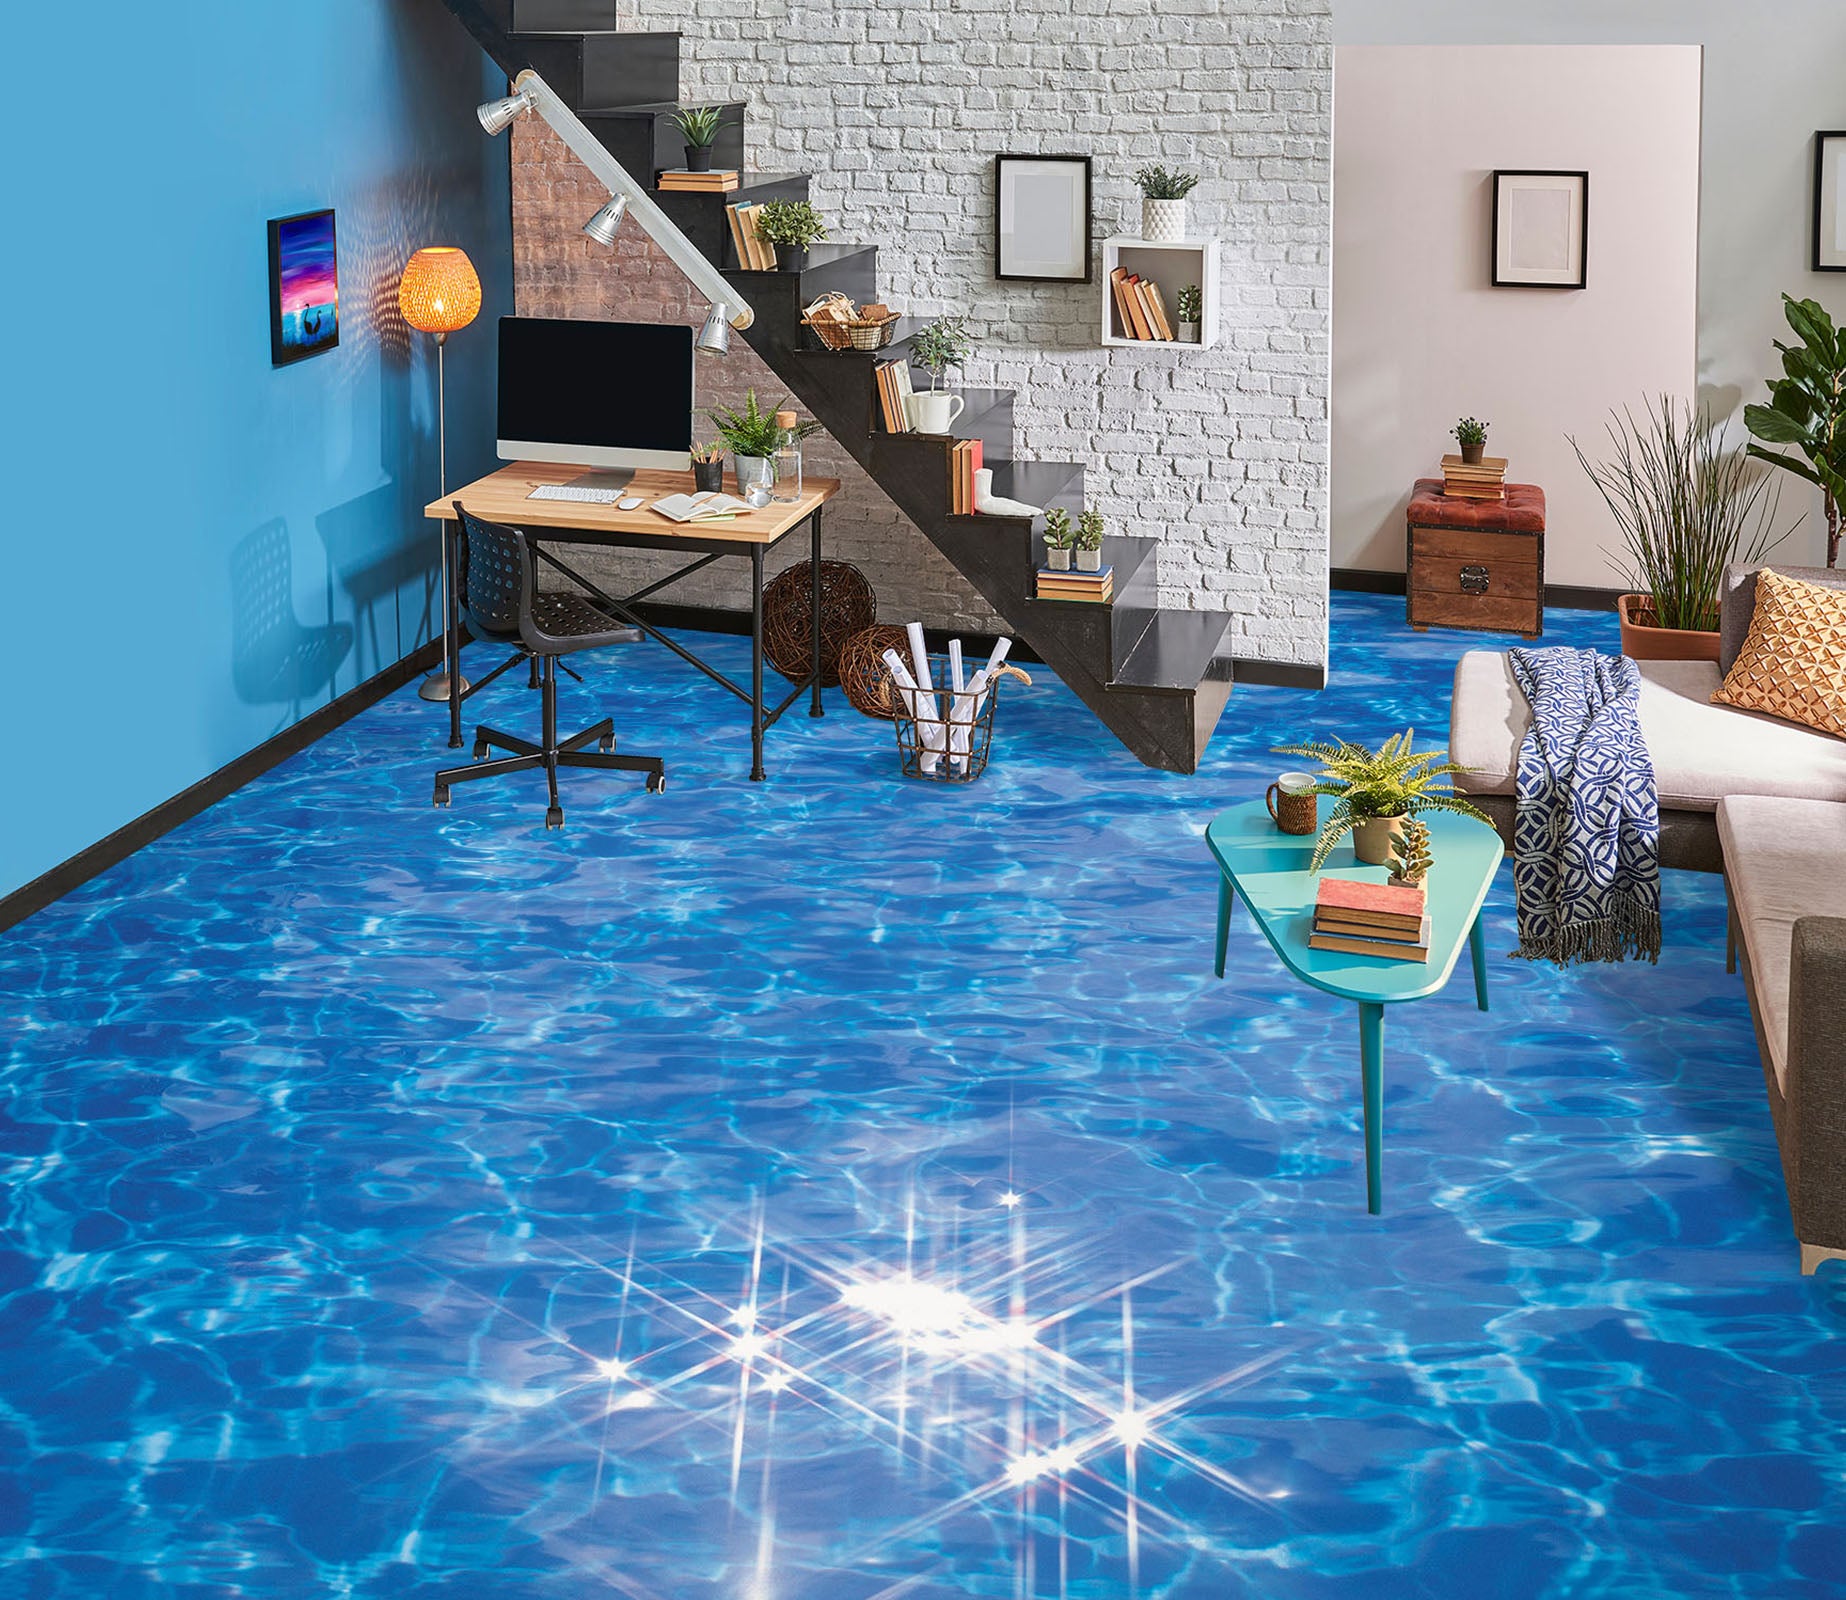 3D Light Art In The Water 1481 Floor Mural  Wallpaper Murals Self-Adhesive Removable Print Epoxy